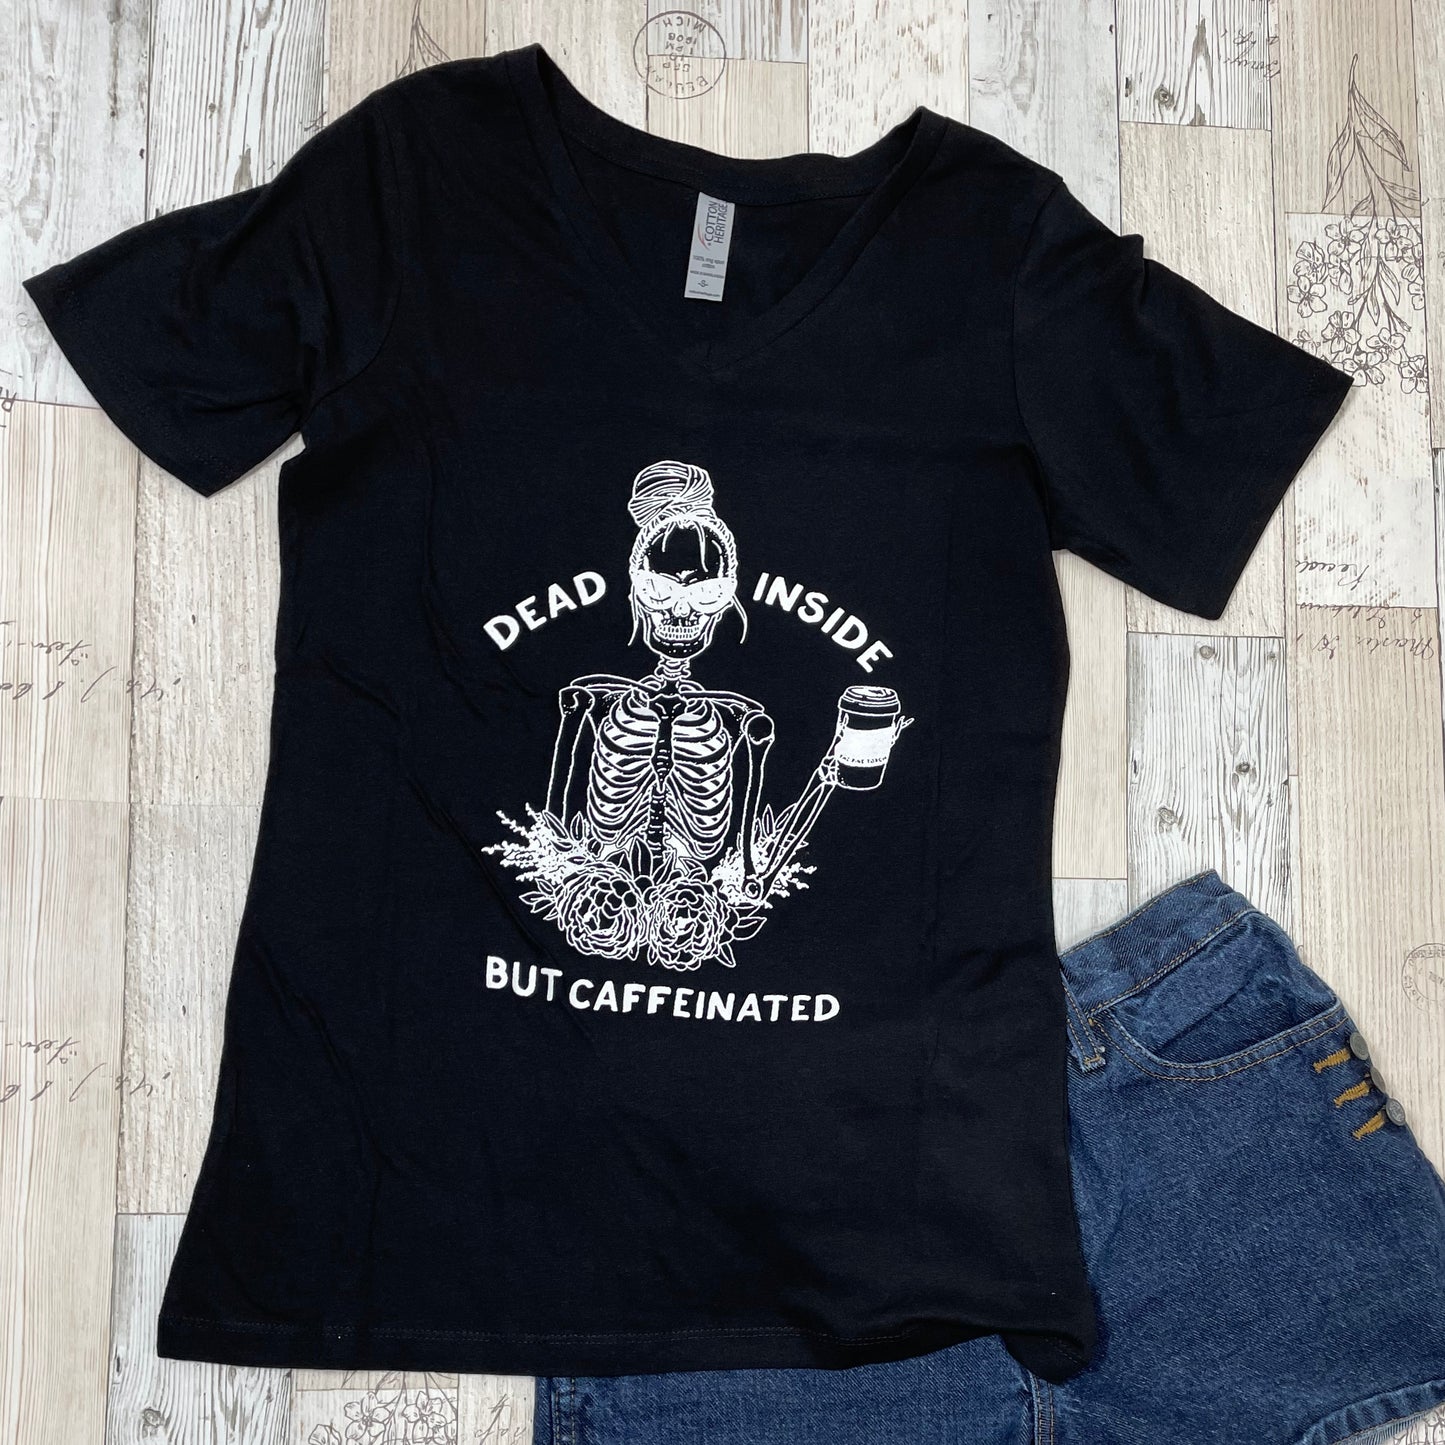 But Caffeinated Graphic Tee - Sassy Chick Clothing